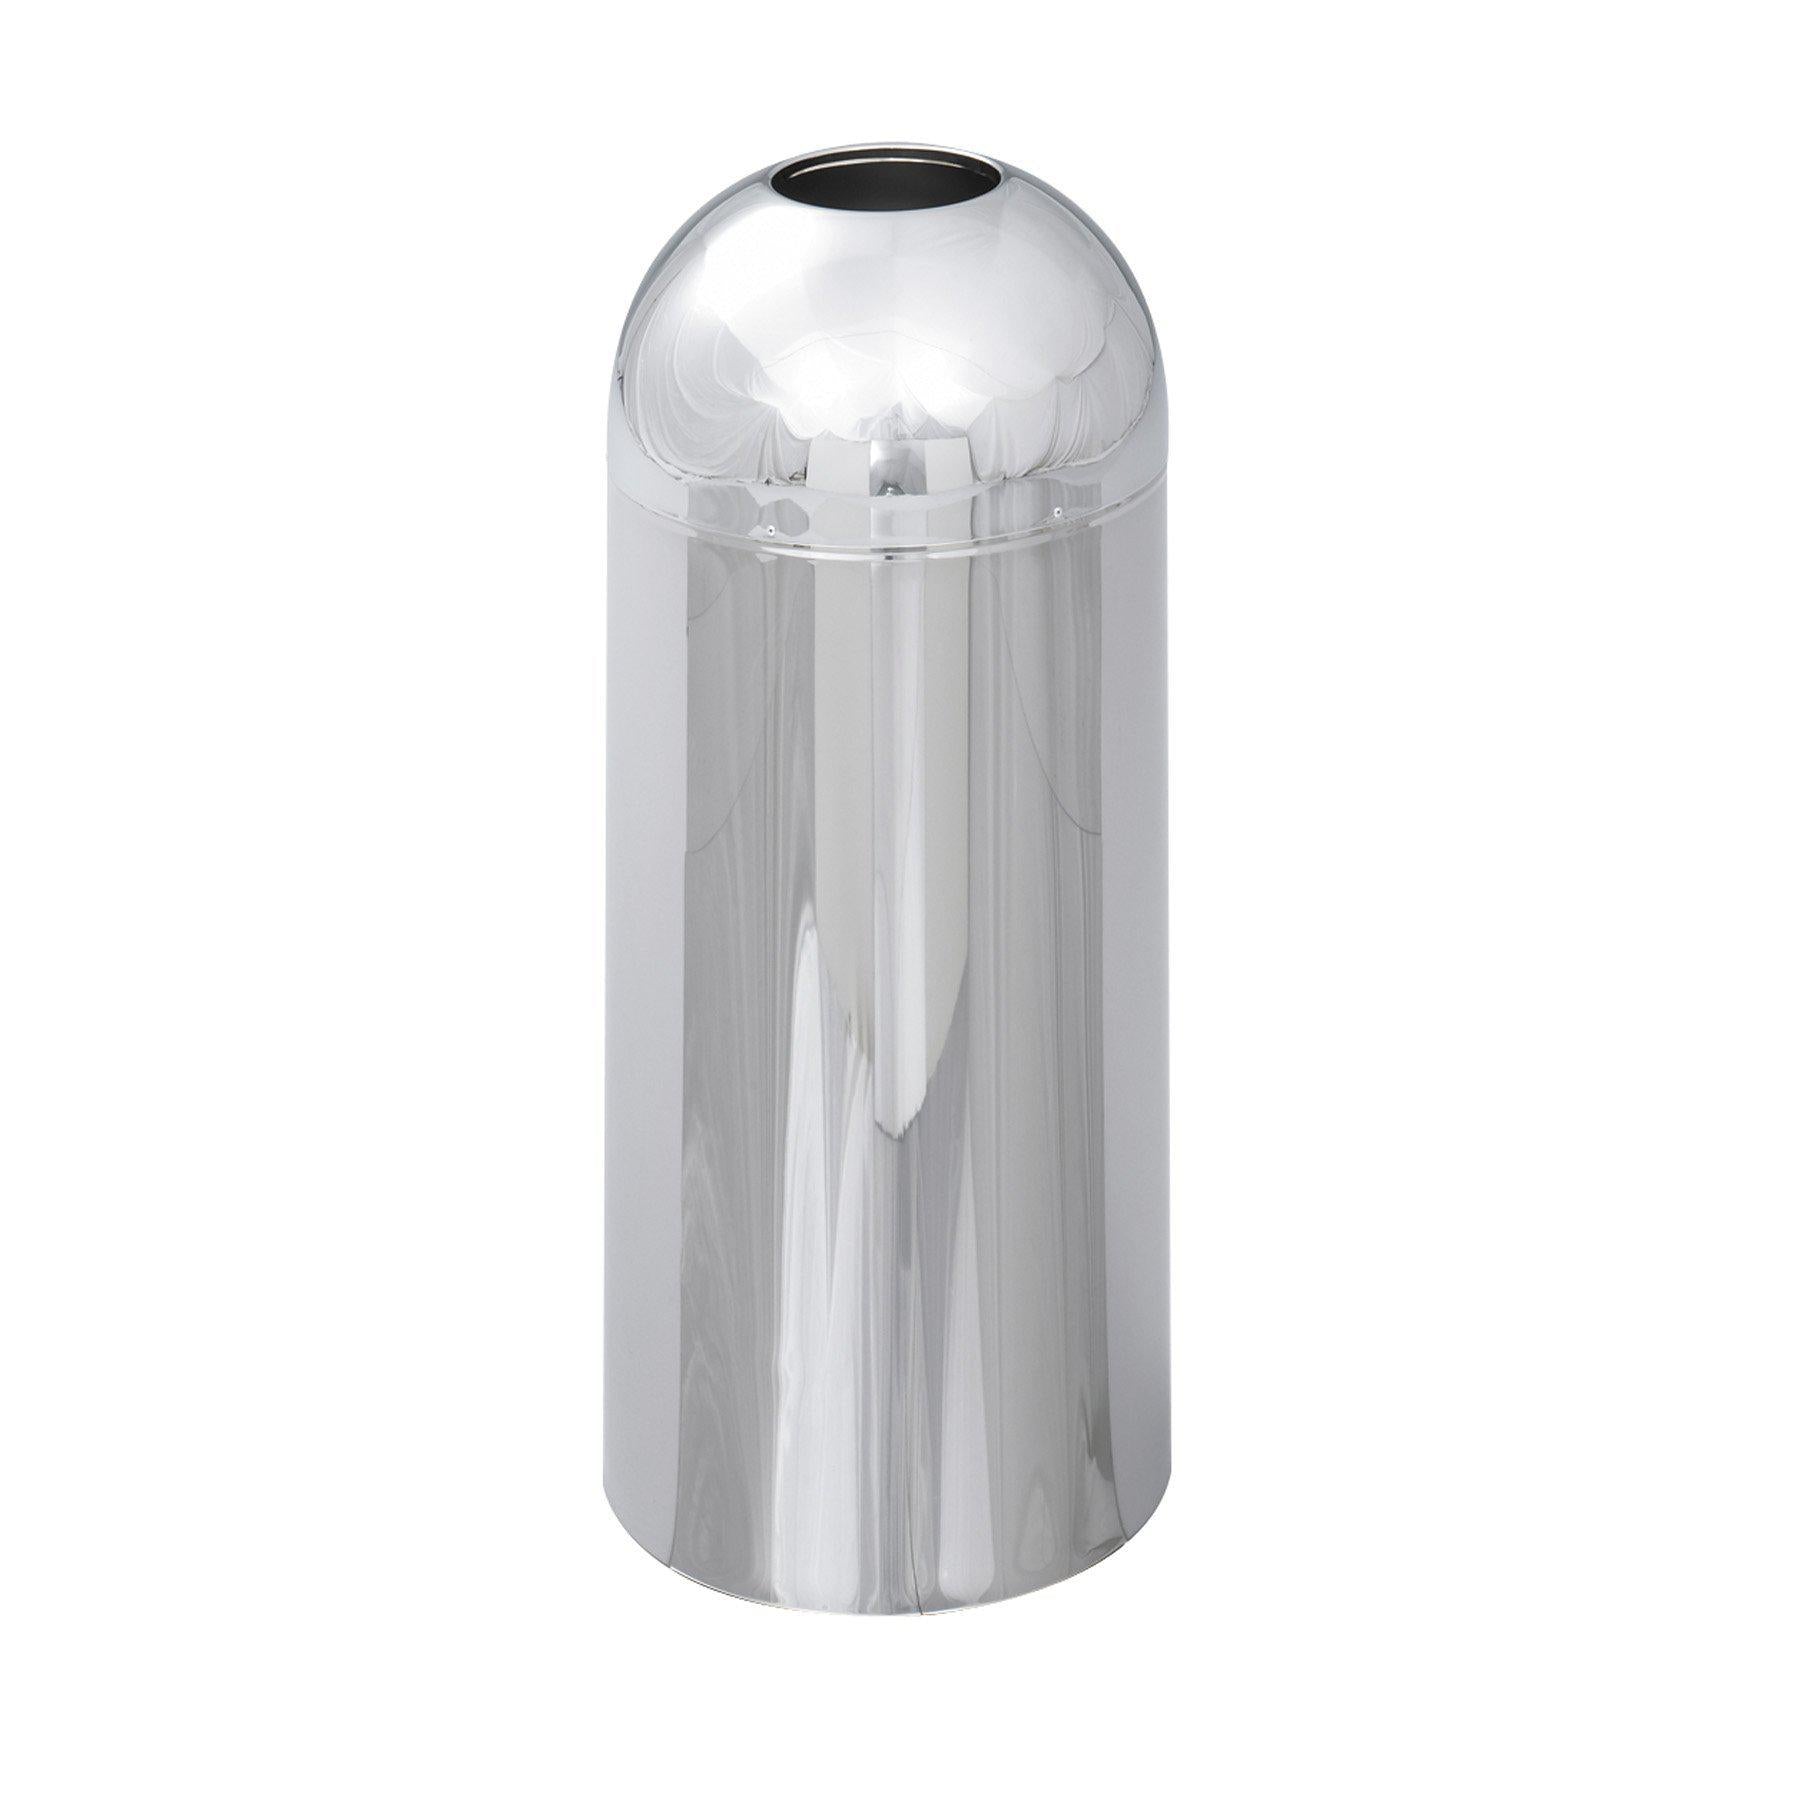 Reflections Open Top Dome Receptacle, 15-Gallon, Chrome-